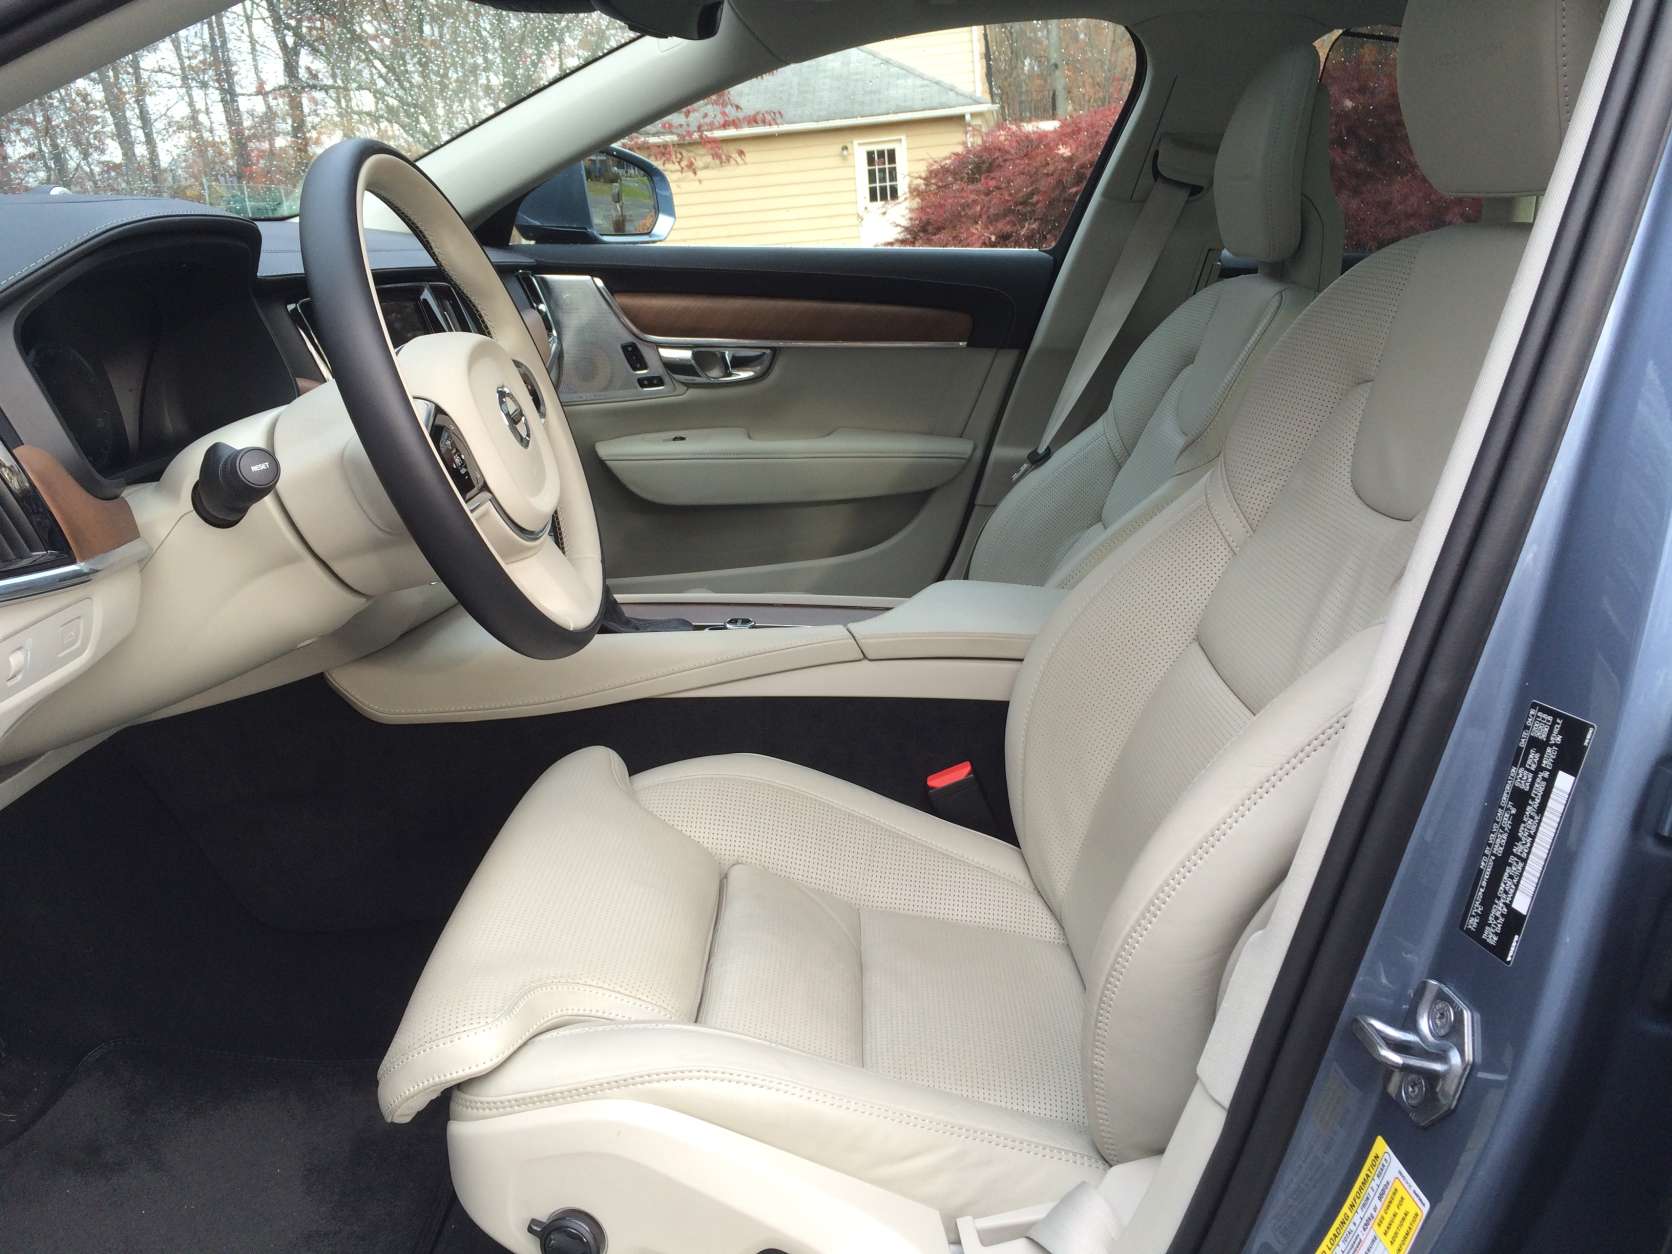 Space is very good for a midsize sedan with seating for five, and those sitting upfront enjoy very comfortable seats.  (WTOP/Mike Parris)